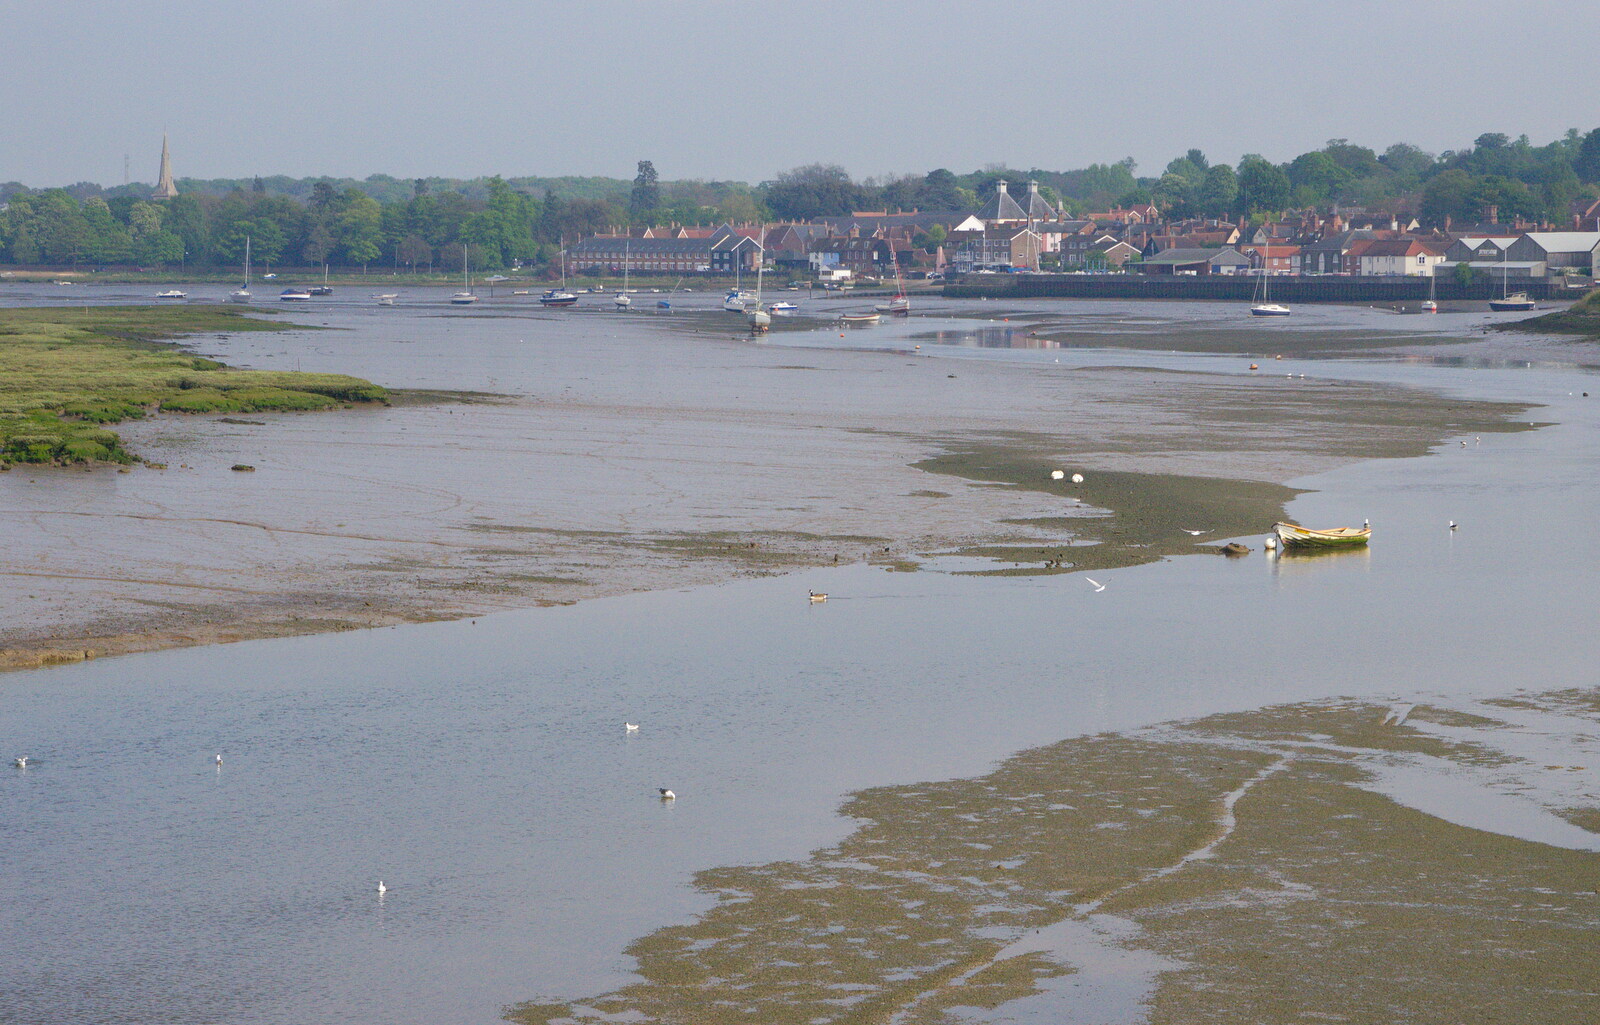 The mudflats and river at Manningtree from Brantham Dereliction, and a SwiftKey Photoshoot, Suffolk and Southwark - 29th April 2014